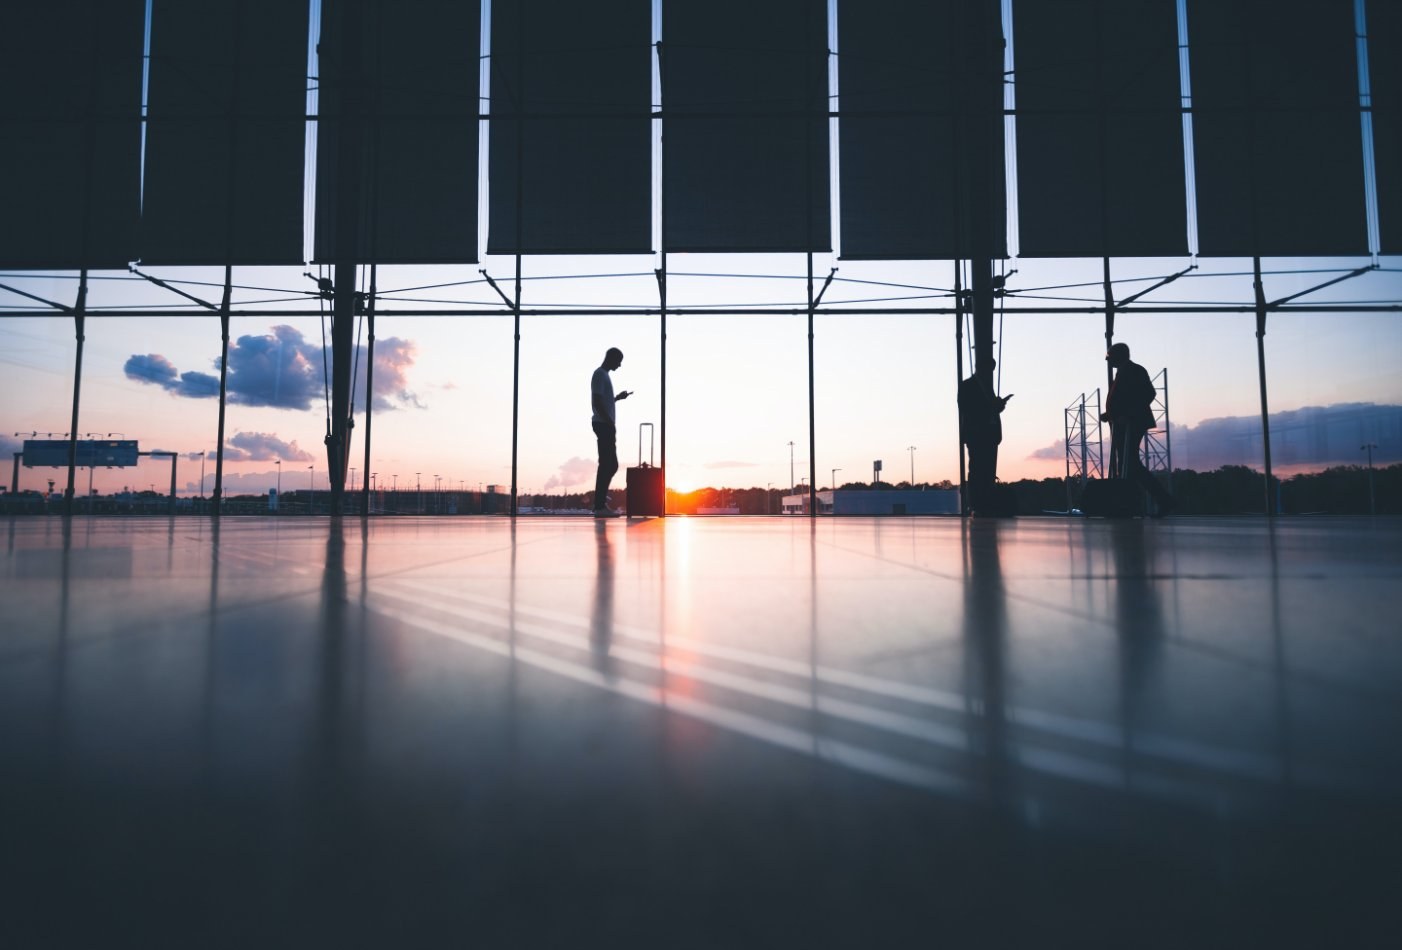 a person standing in an airport with windows behind showing sunset or sunrise